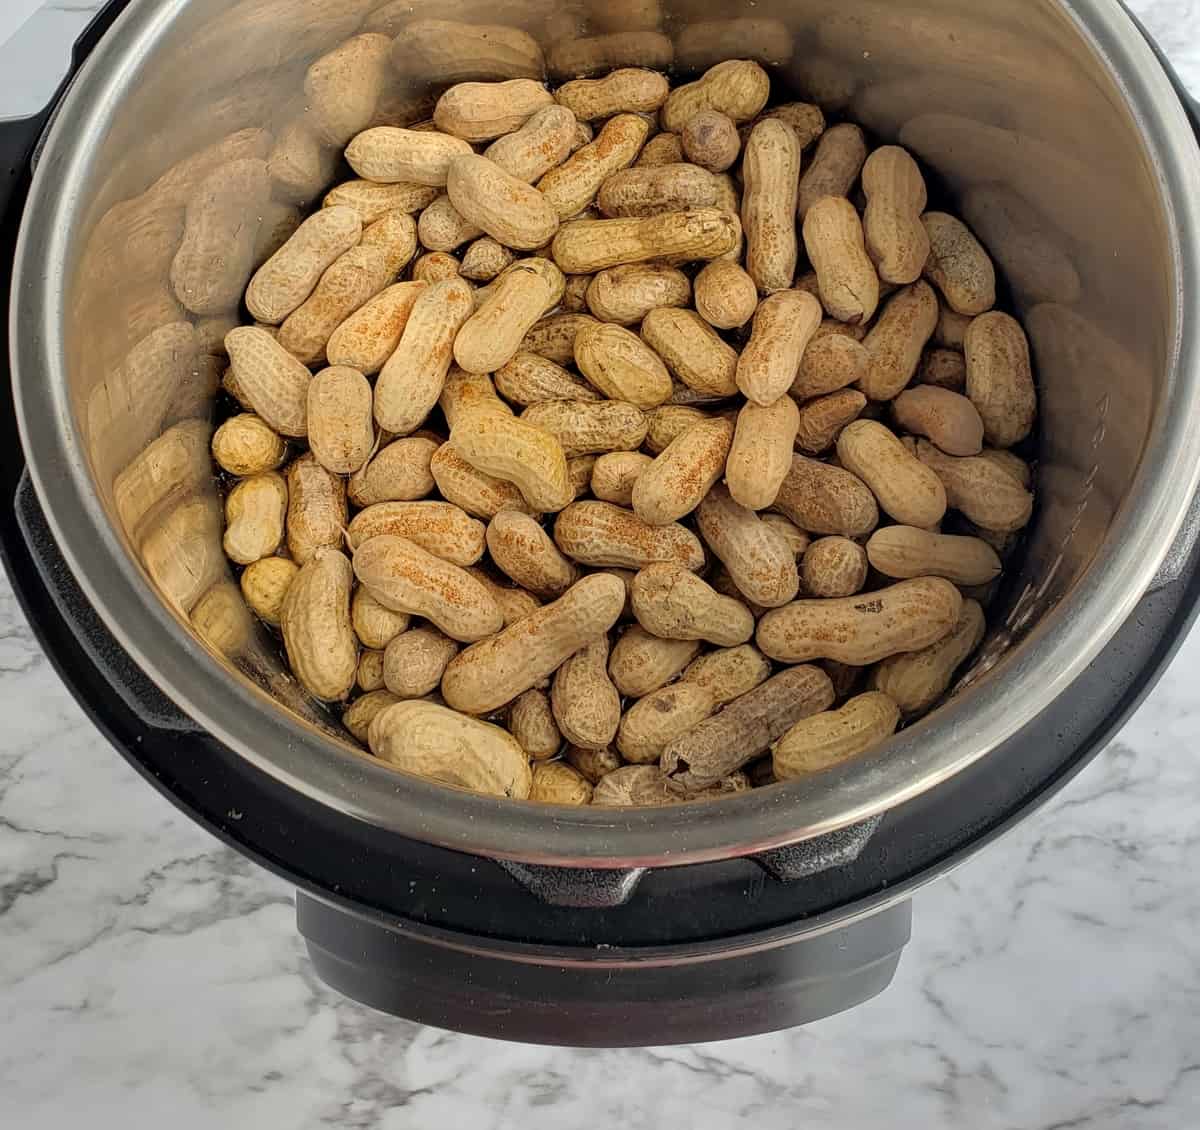 Peanuts in the shell in an Instant Pot with seasoning sprinkled on top.